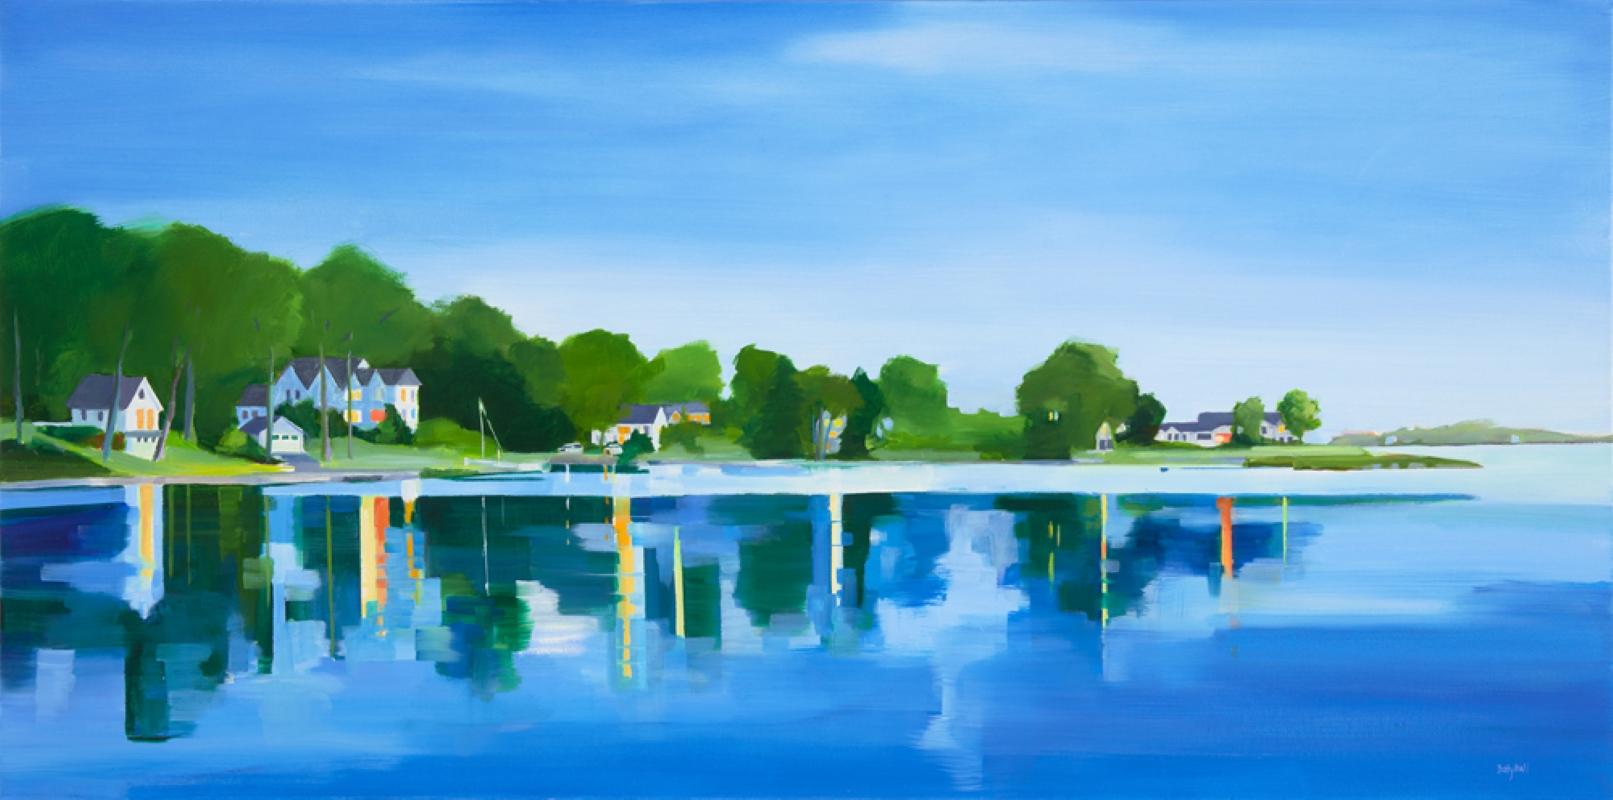 Betty Ball Abstract Painting - Contentment Island, Landscape, Waterscape, Reflections, Blue, Water